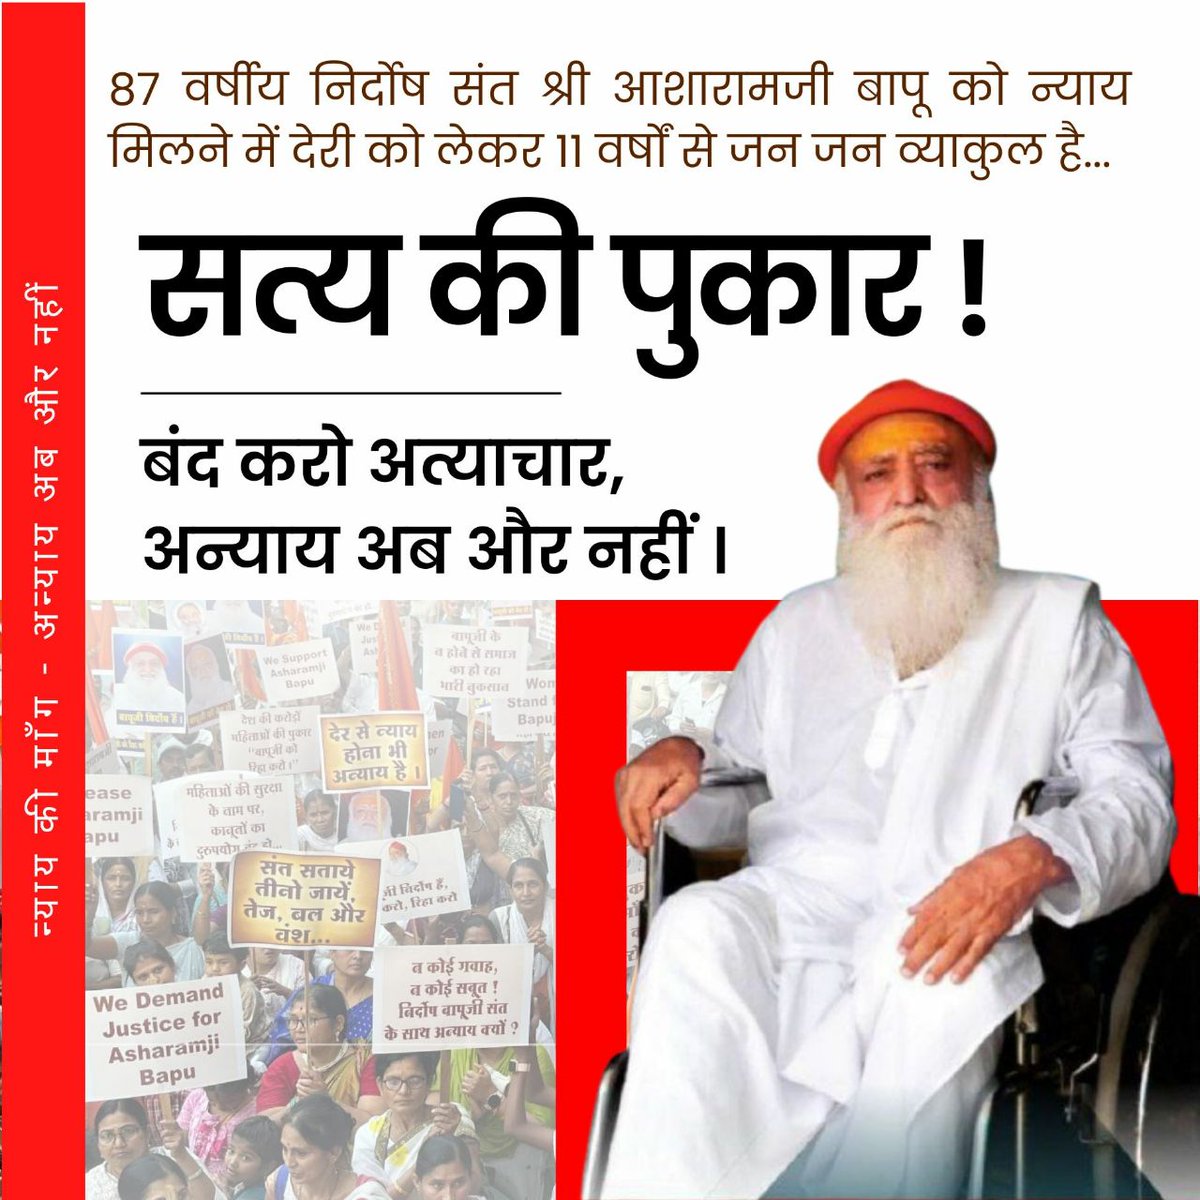 Sant Shri Asharamji Bapu dedicated his entire life for the upliftment of society & initiated various programs for the betterment of the society.

#Bapuji stood against forced religious conversions. That's why he has been kept in the jail.

Anyaay Ab Aur Nahi !
#SeekJustice